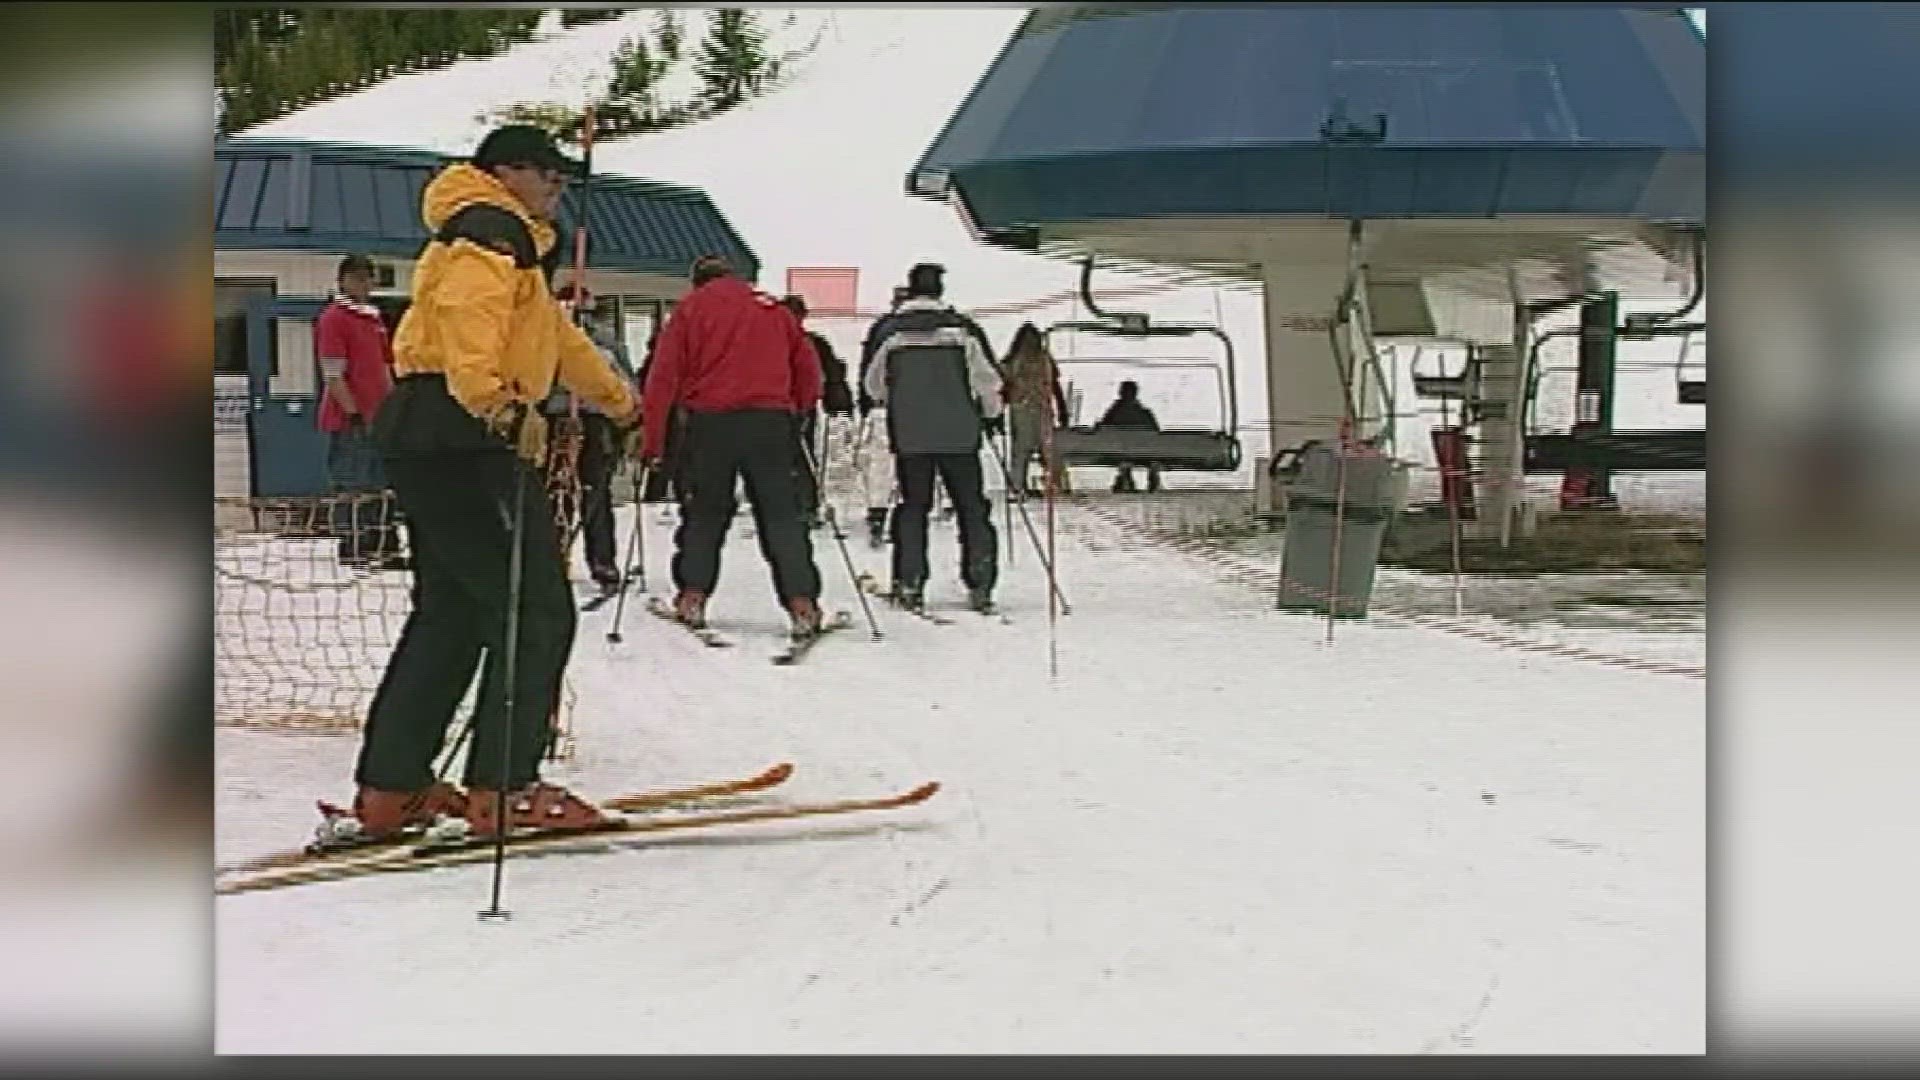 In 2002, skiers didn't let the potential threat of thunder dampen their spirits as they waited inside to weather the storm for one last run of the season.